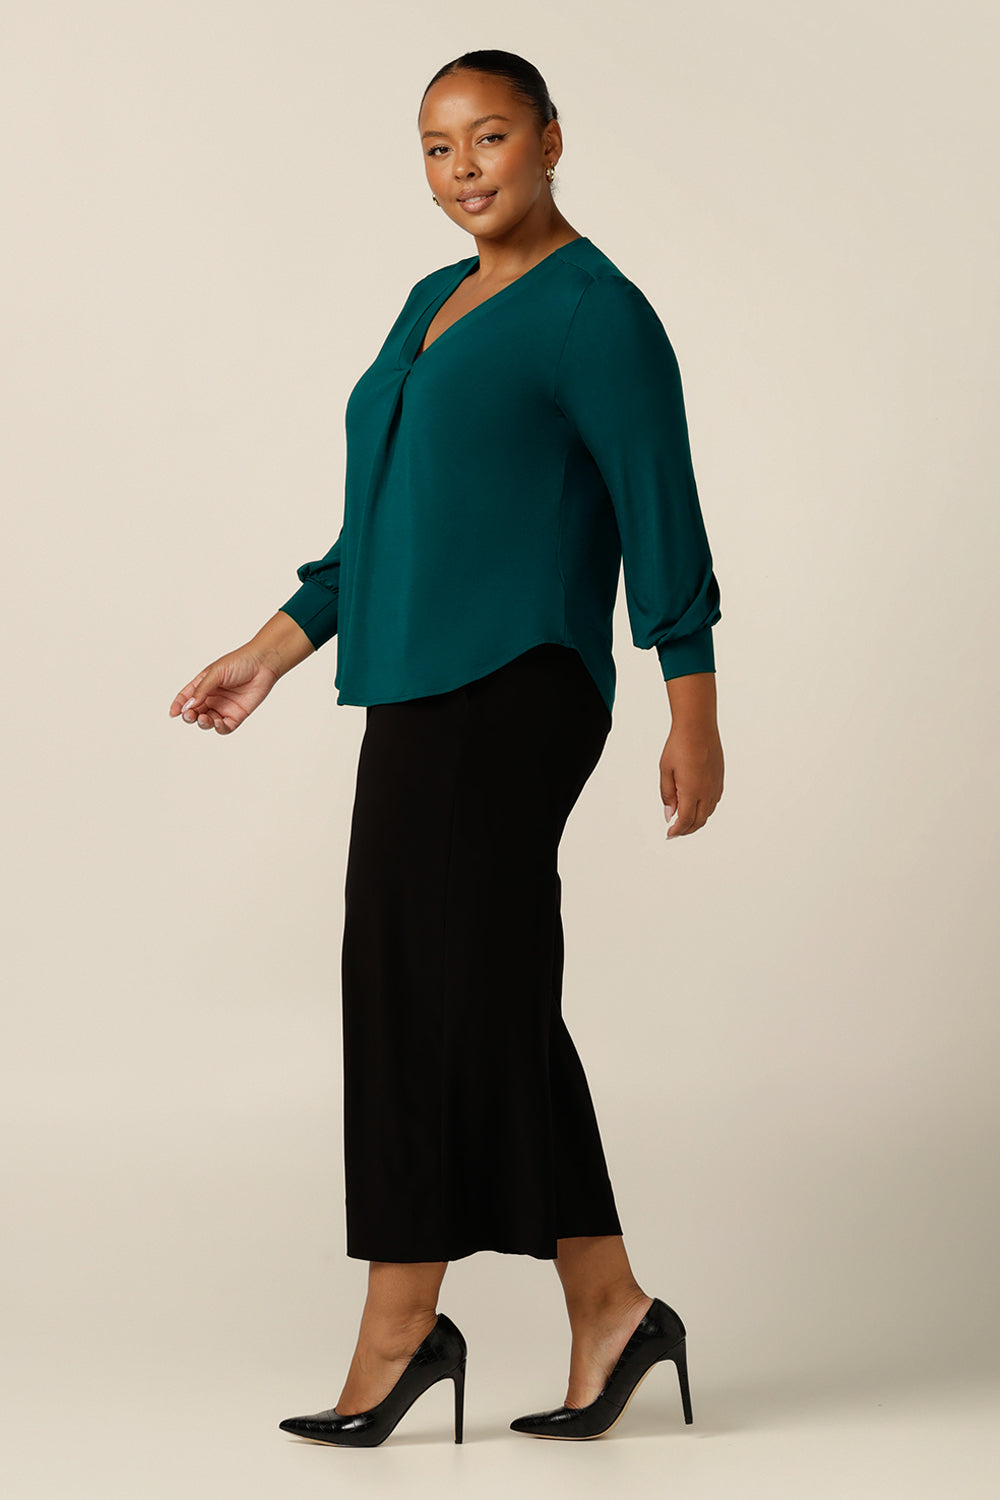 A size 18, plus size woman wears a long sleeve, V-neck top in bamboo jersey. Made in Australia, by Australian and New Zealand women's clothing company L&F,  shop this workwear top in petite to plus sizes.